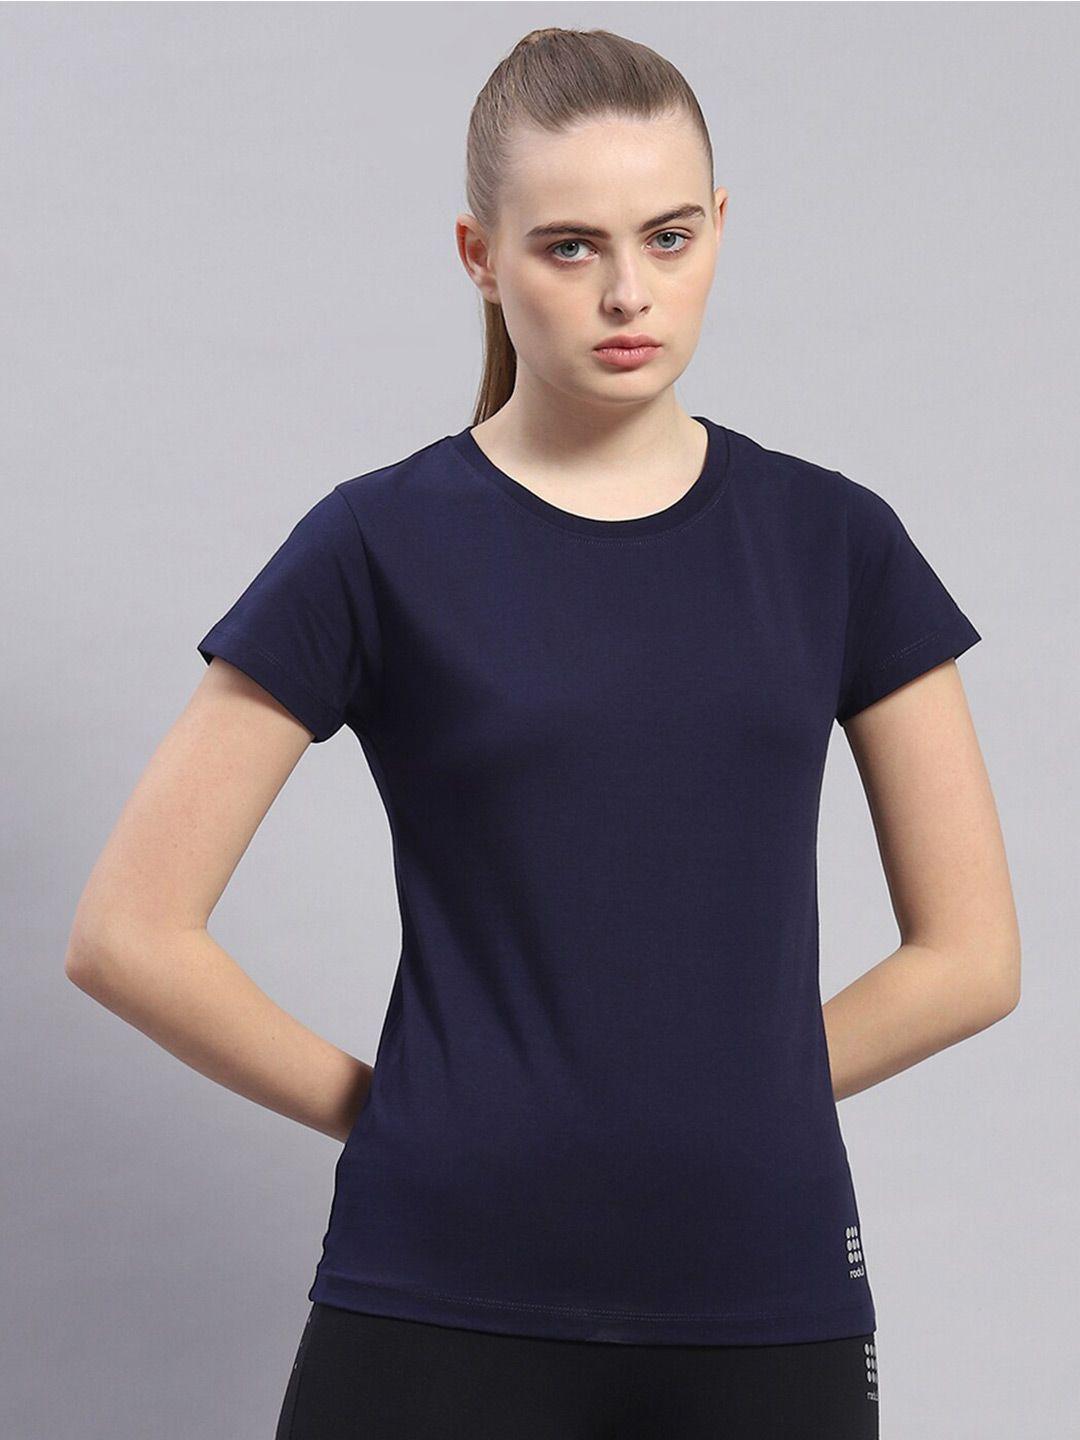 rock.it-round-neck-short-sleeves-casual-top